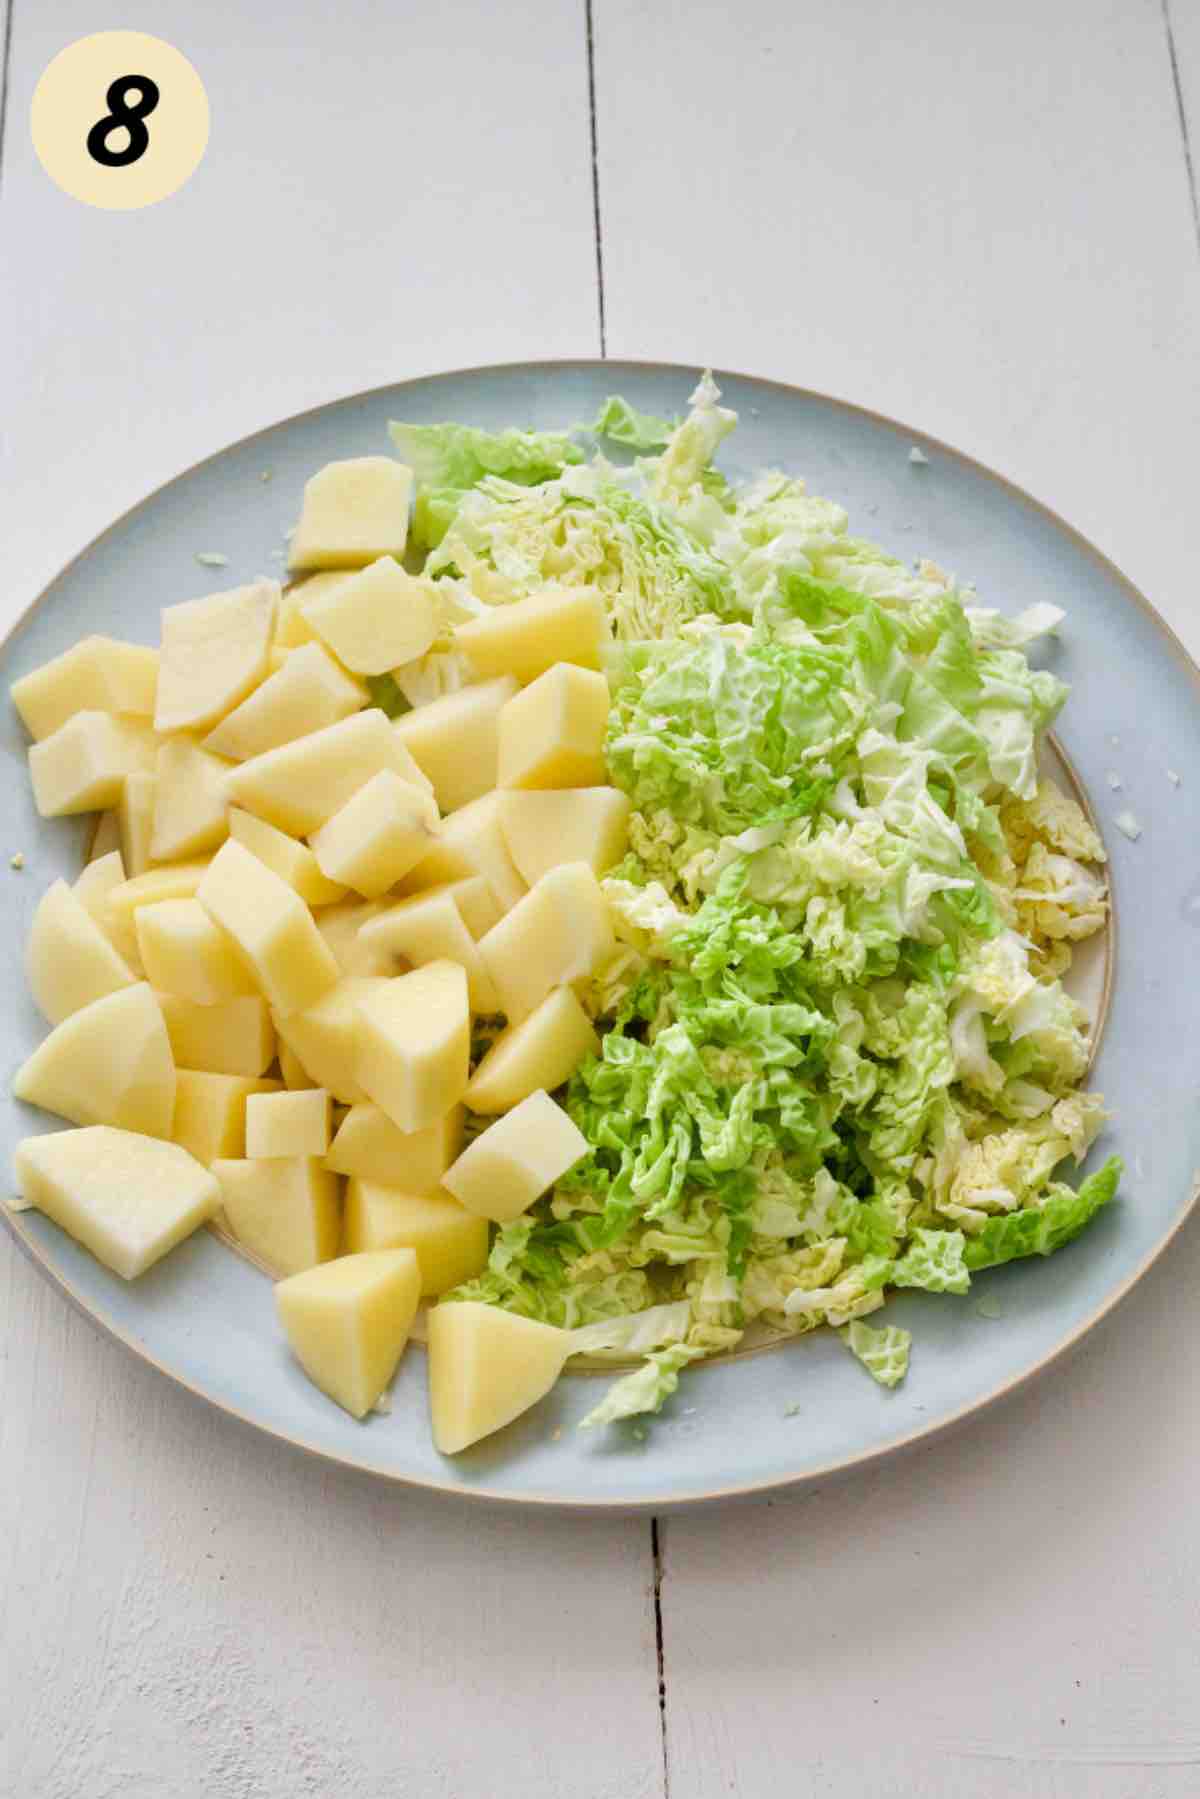 Plate with peeled and cubed potatoes and shredded cabbage.